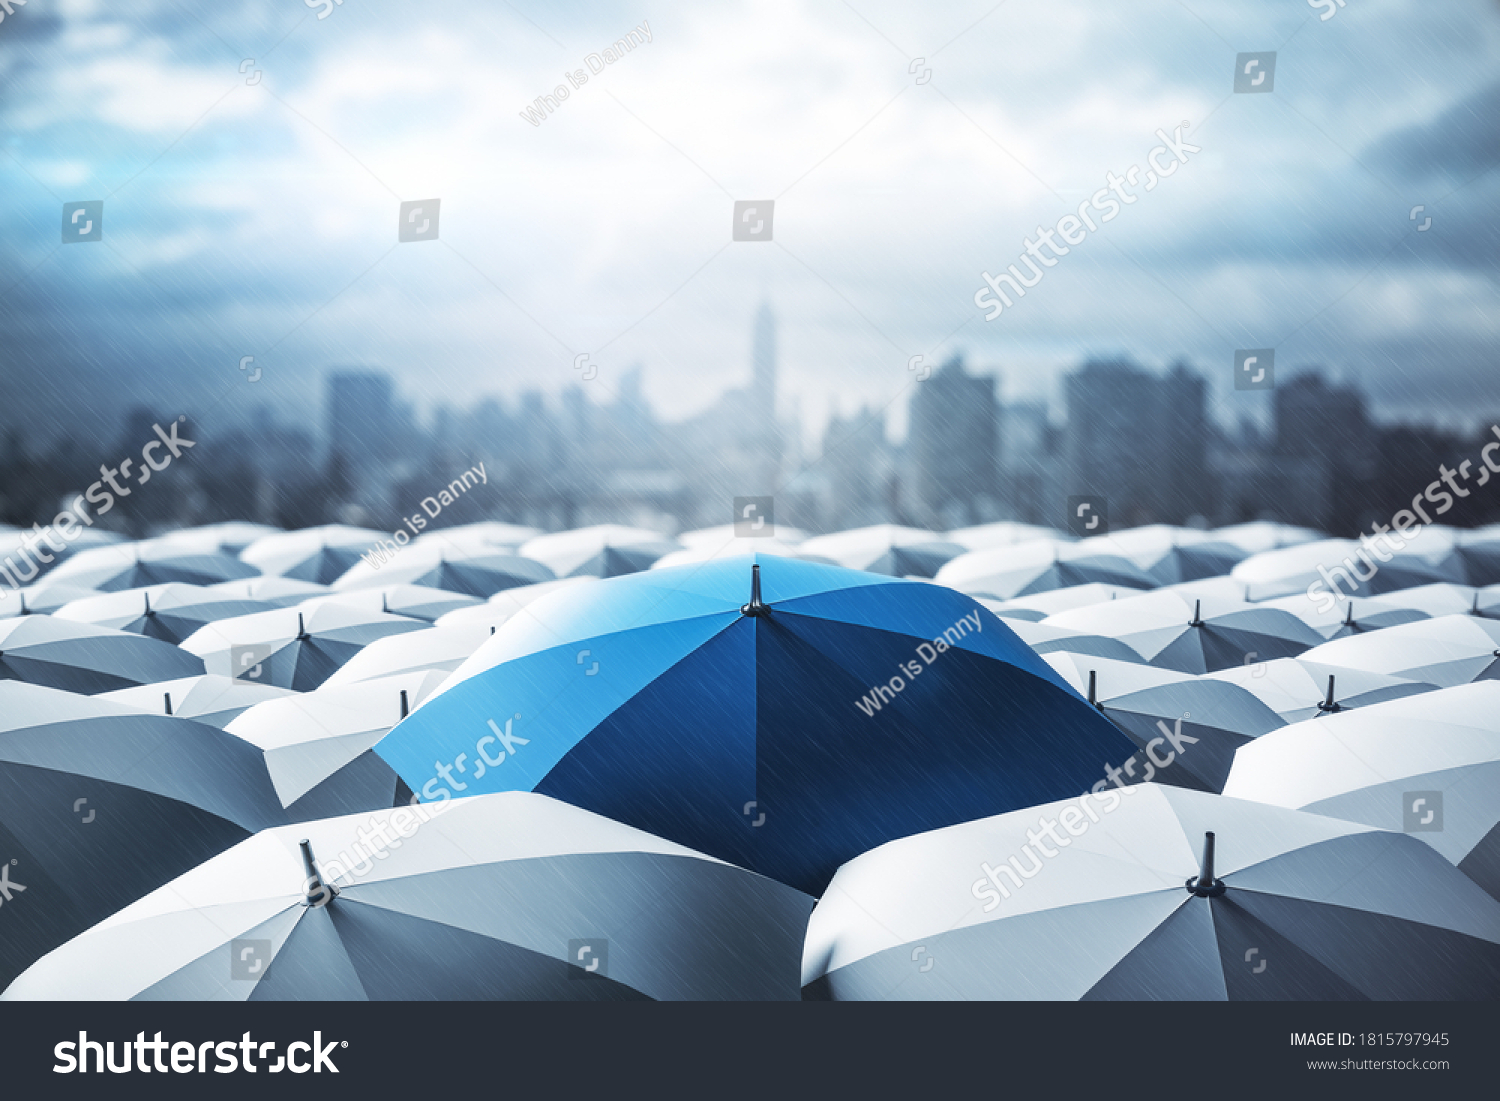 Blue umbrella on top of other gray umbrellas on city background. Business and safety concept #1815797945